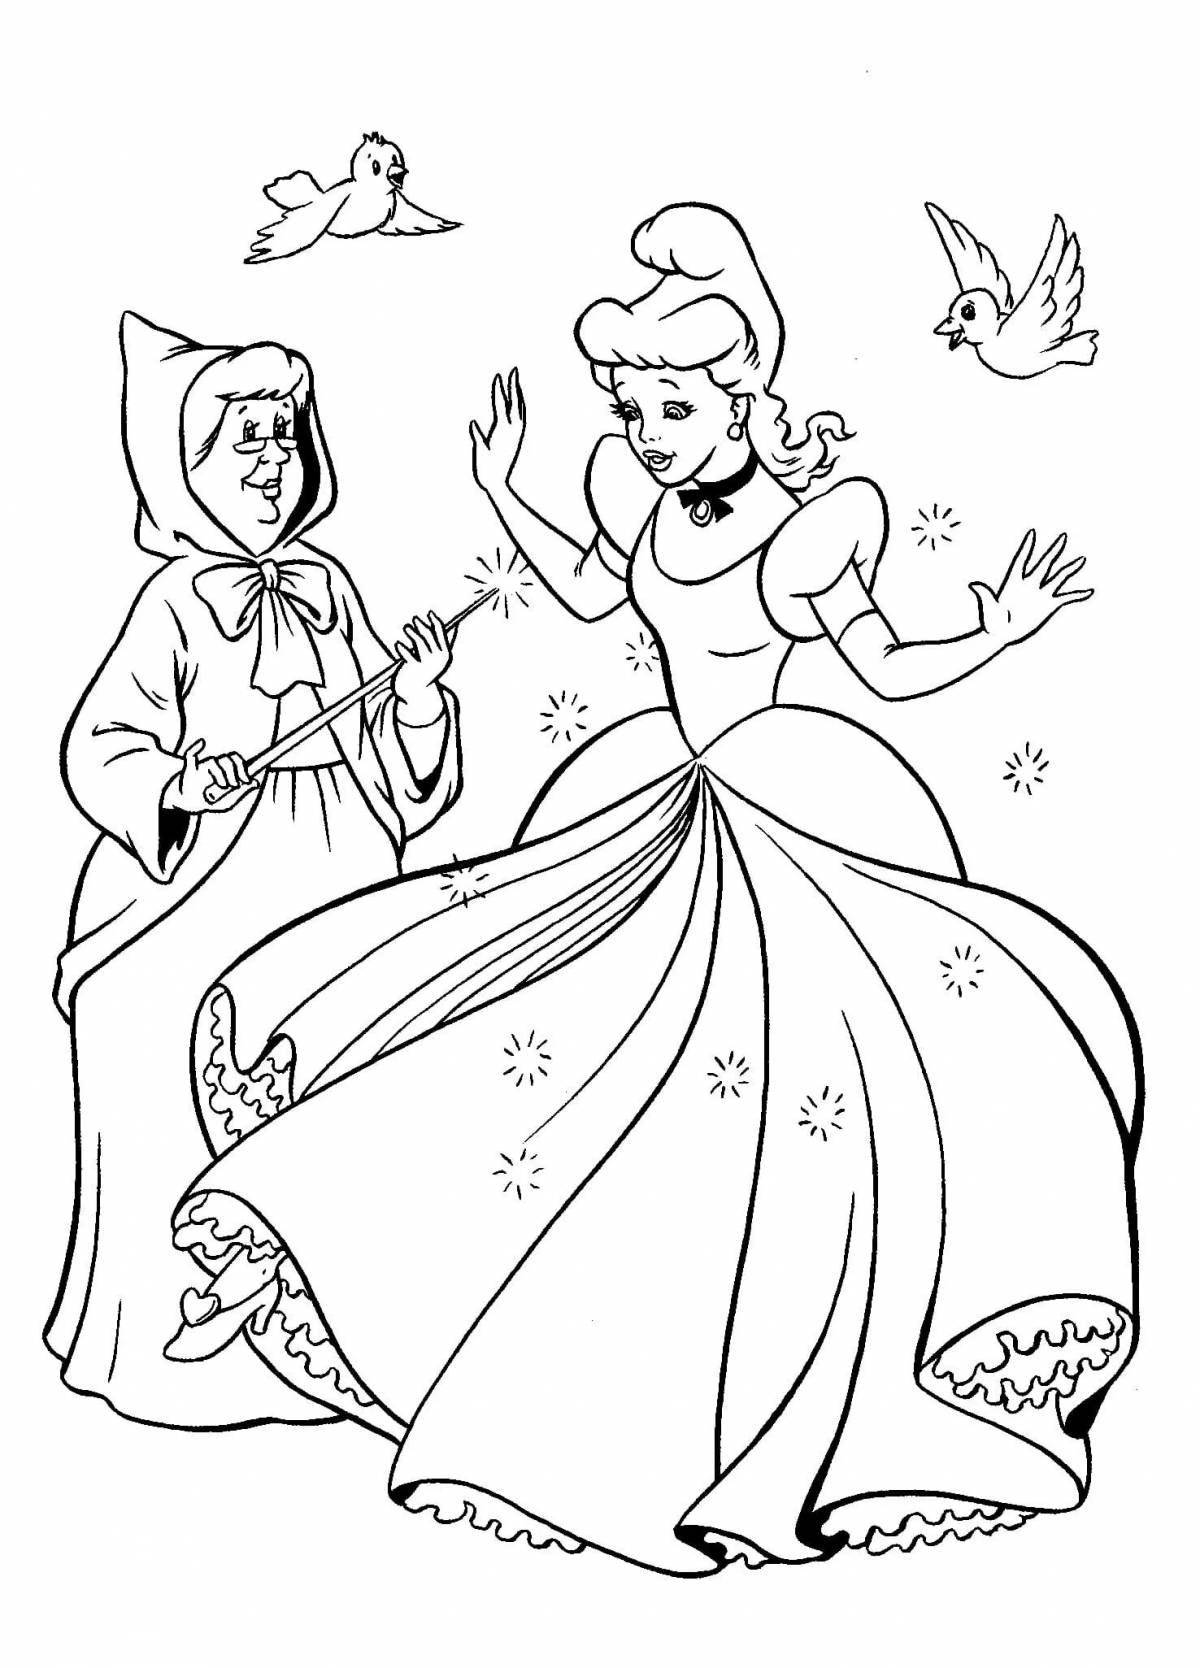 Adorable fairy tale coloring book for girls